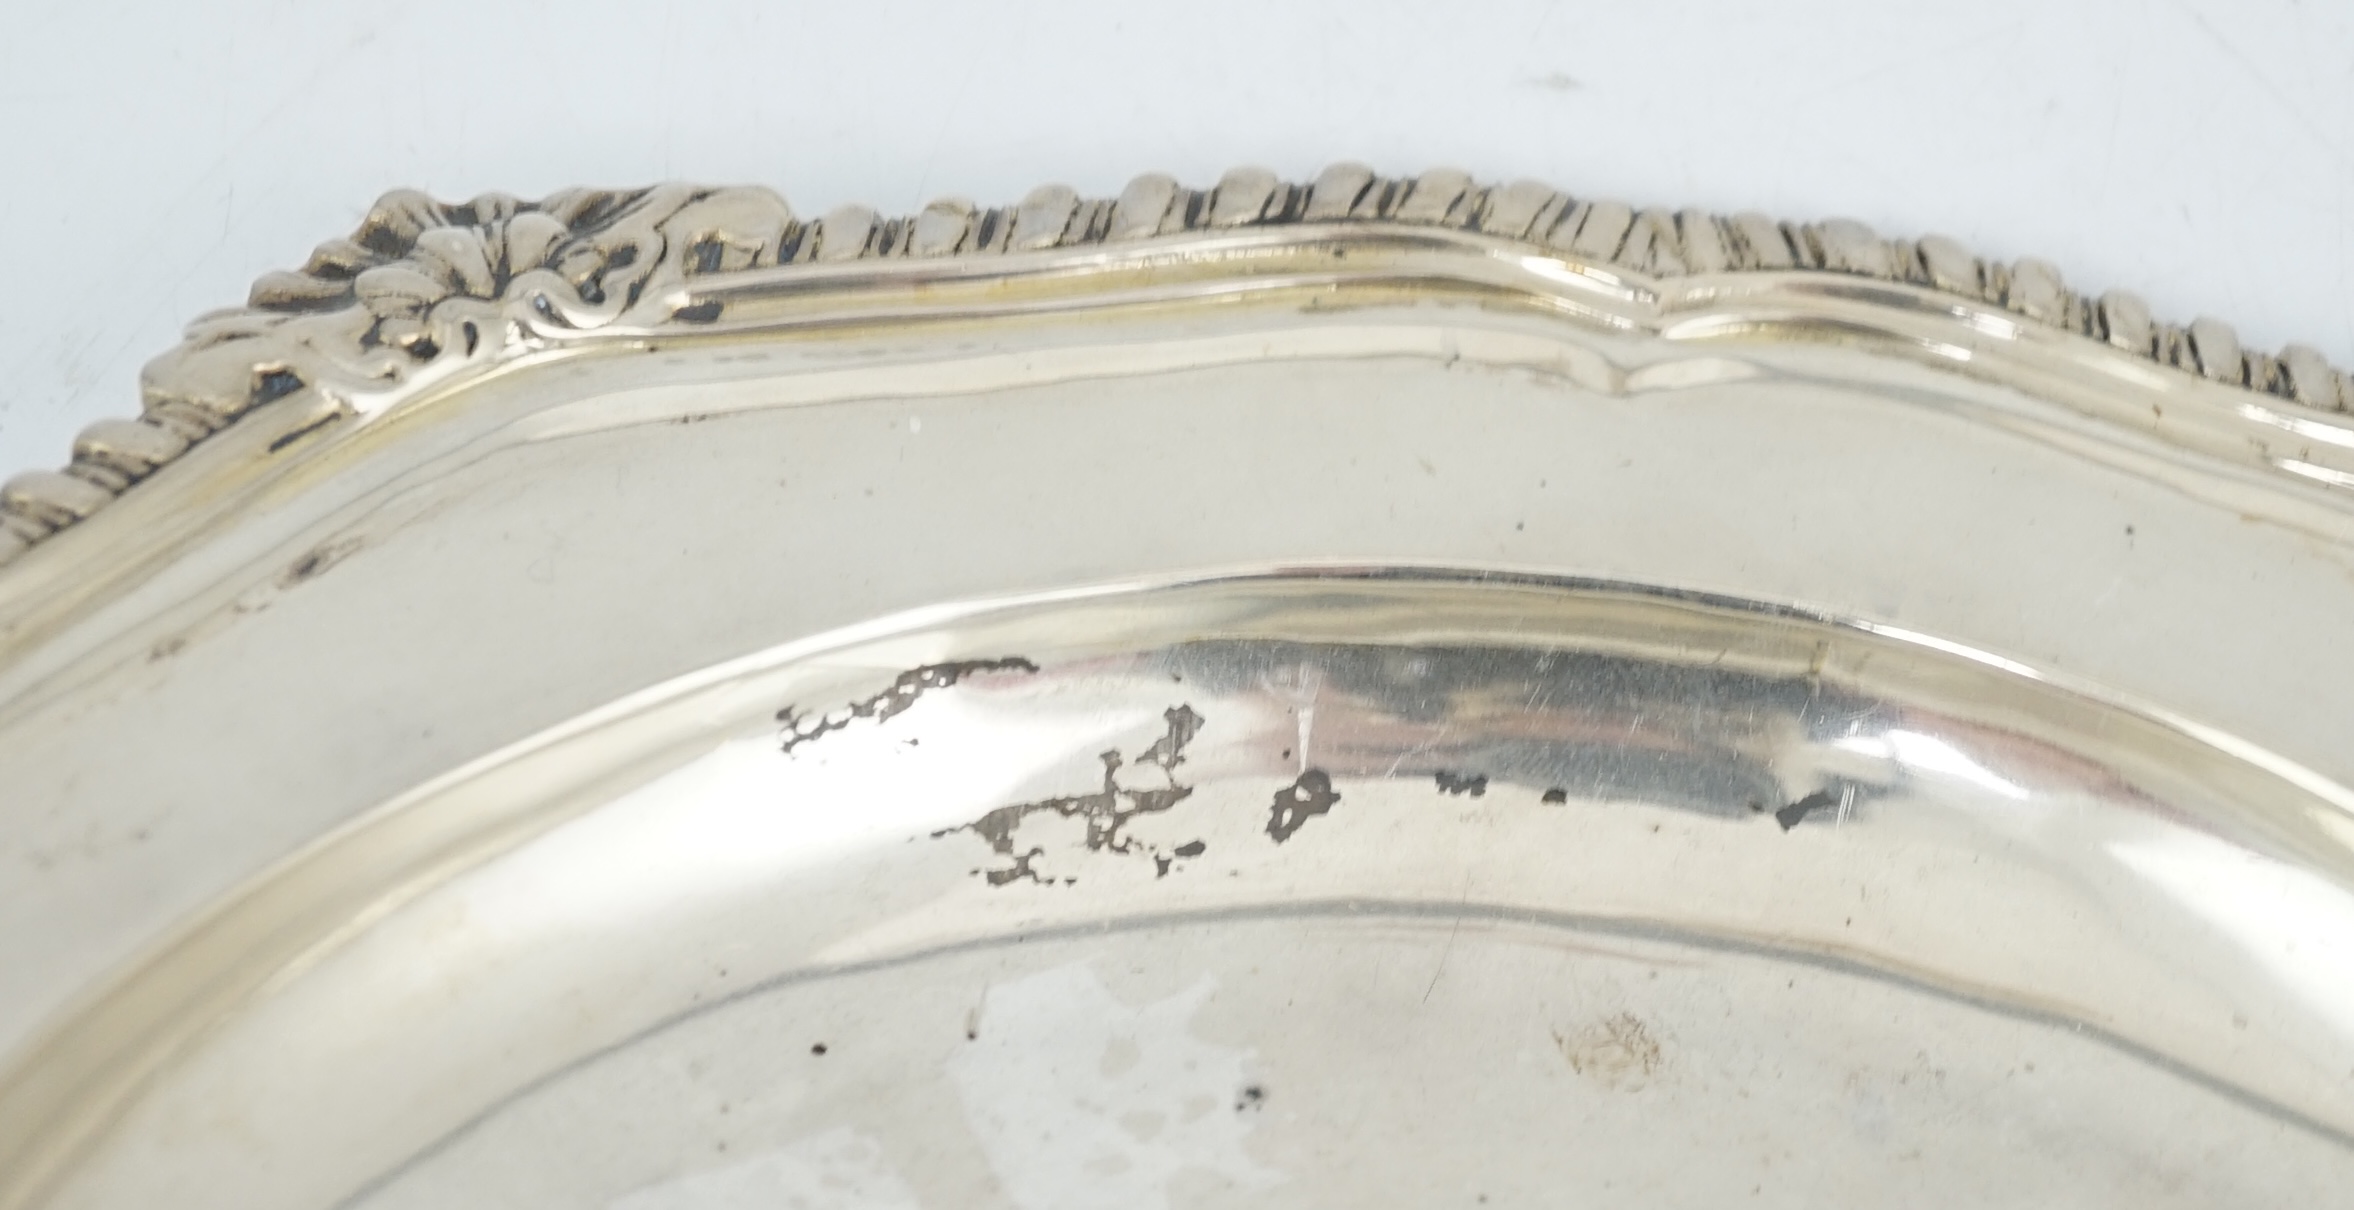 A George III silver soup plate, by Parker & Wakelin